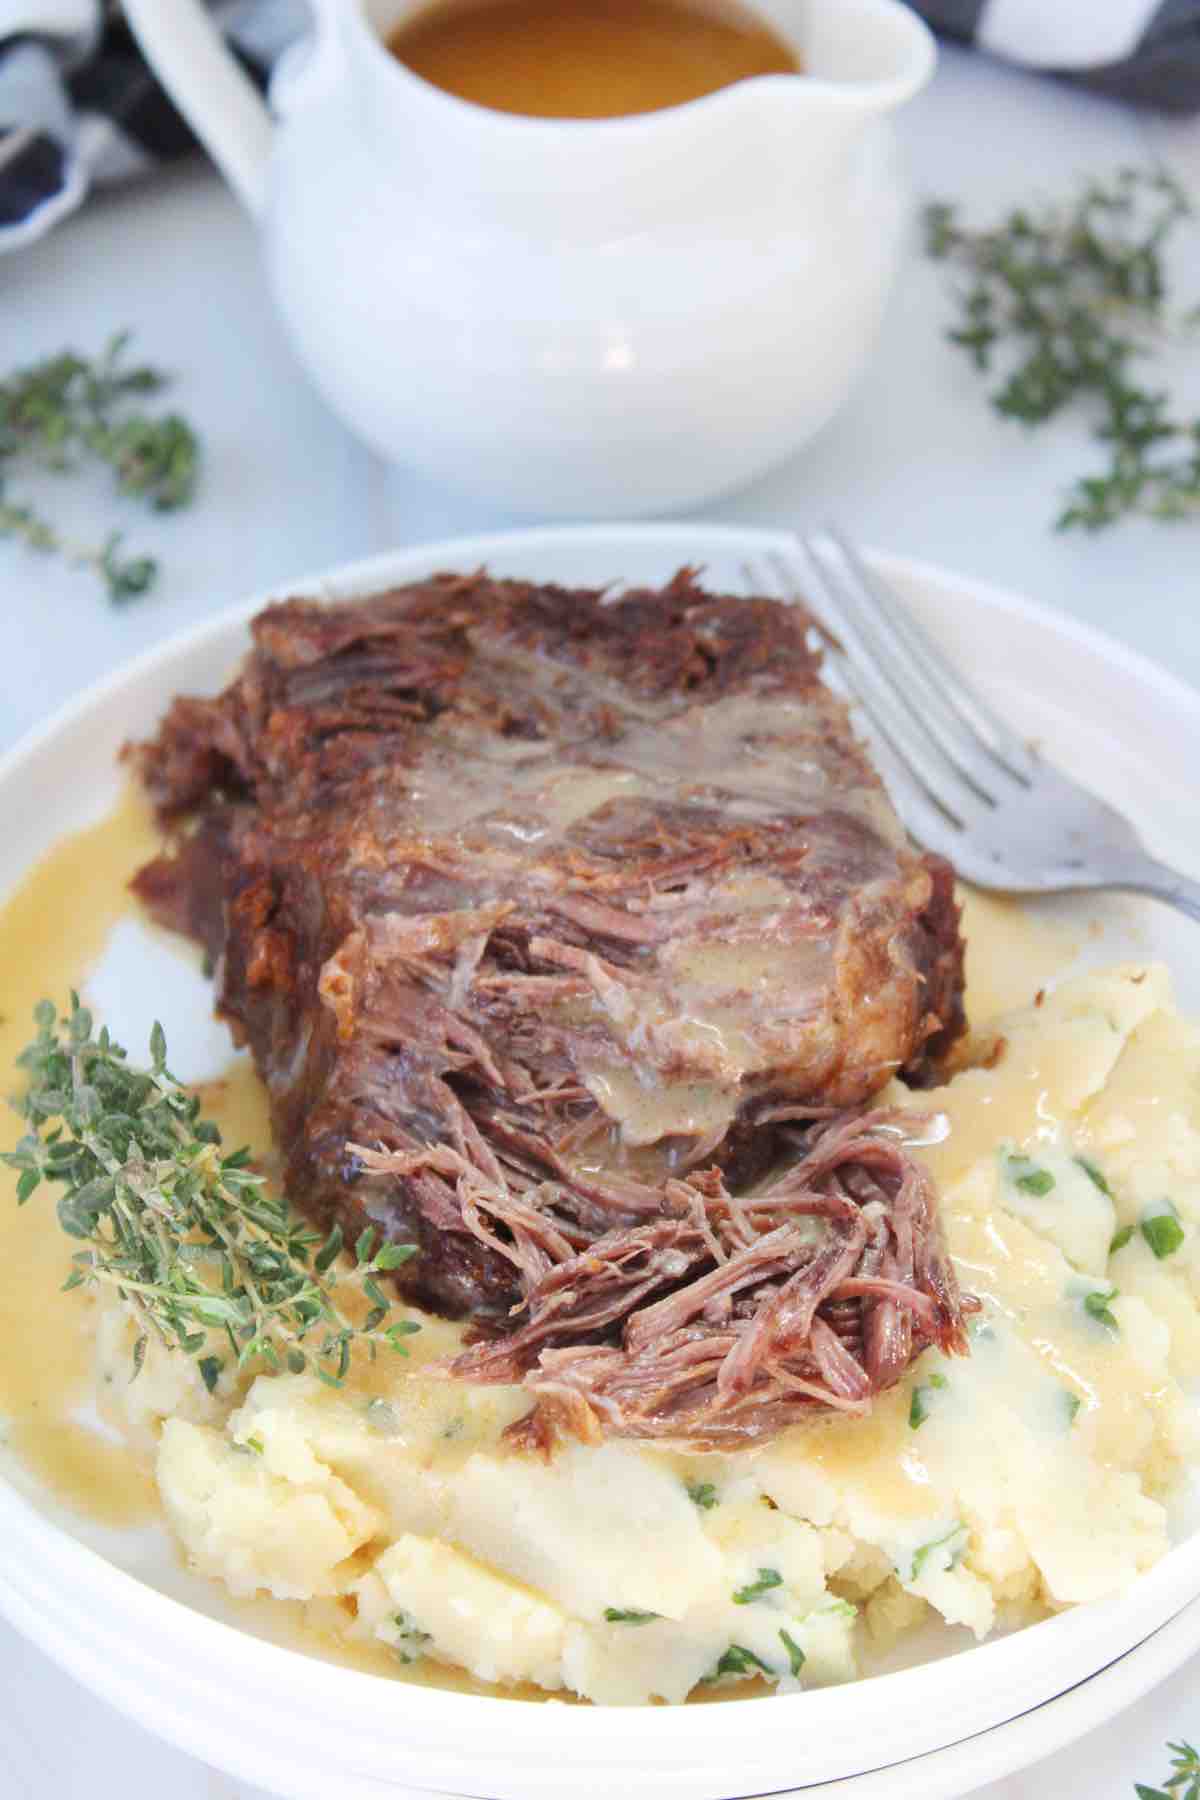 Chuck roast beef made in the pressure cooker is served with homemade gravy in this photo.